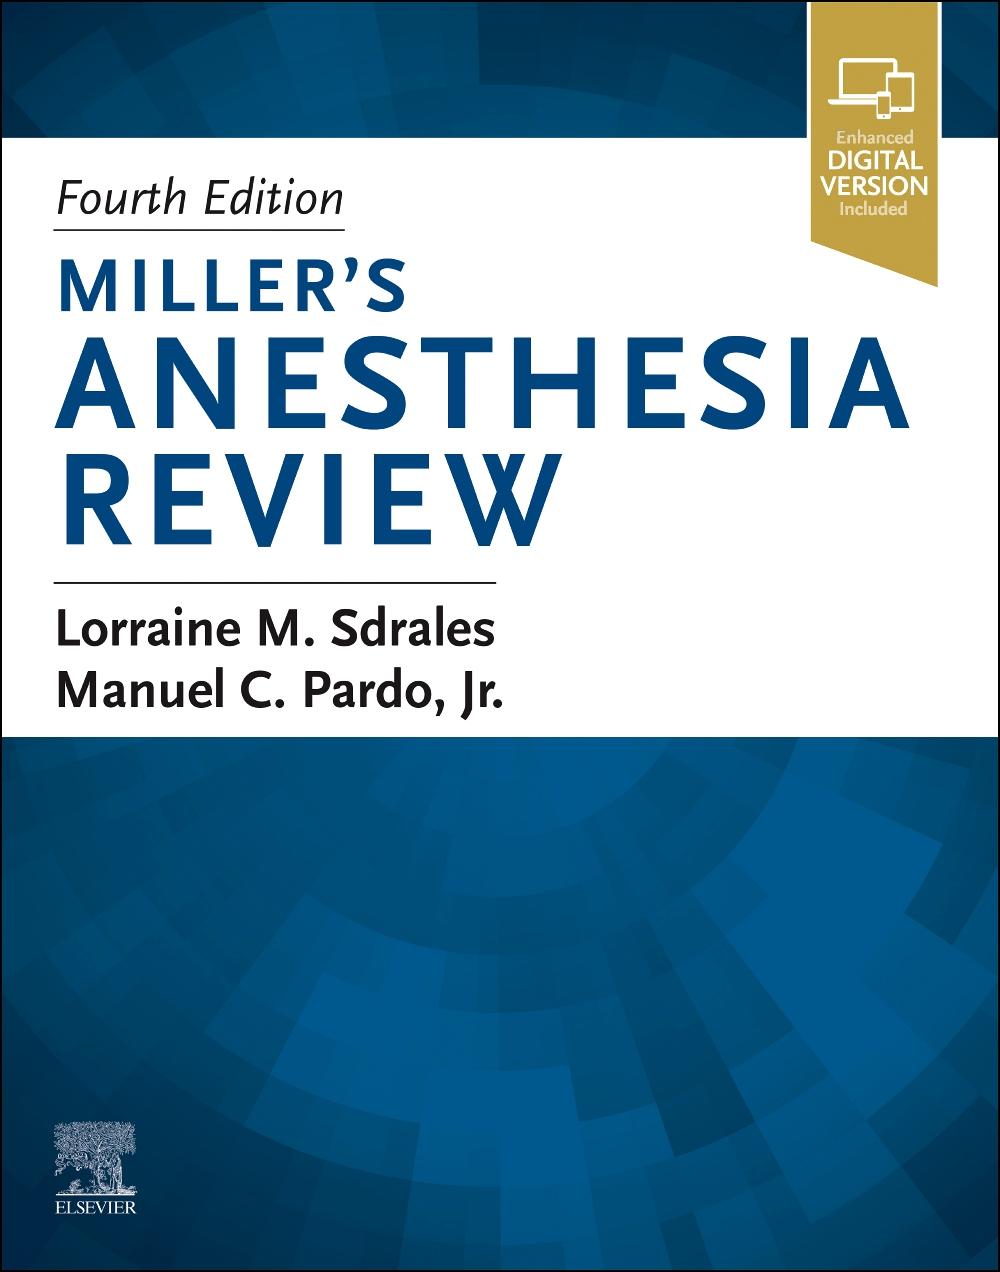 Book Miller's Anesthesia Review Lorraine M. Sdrales